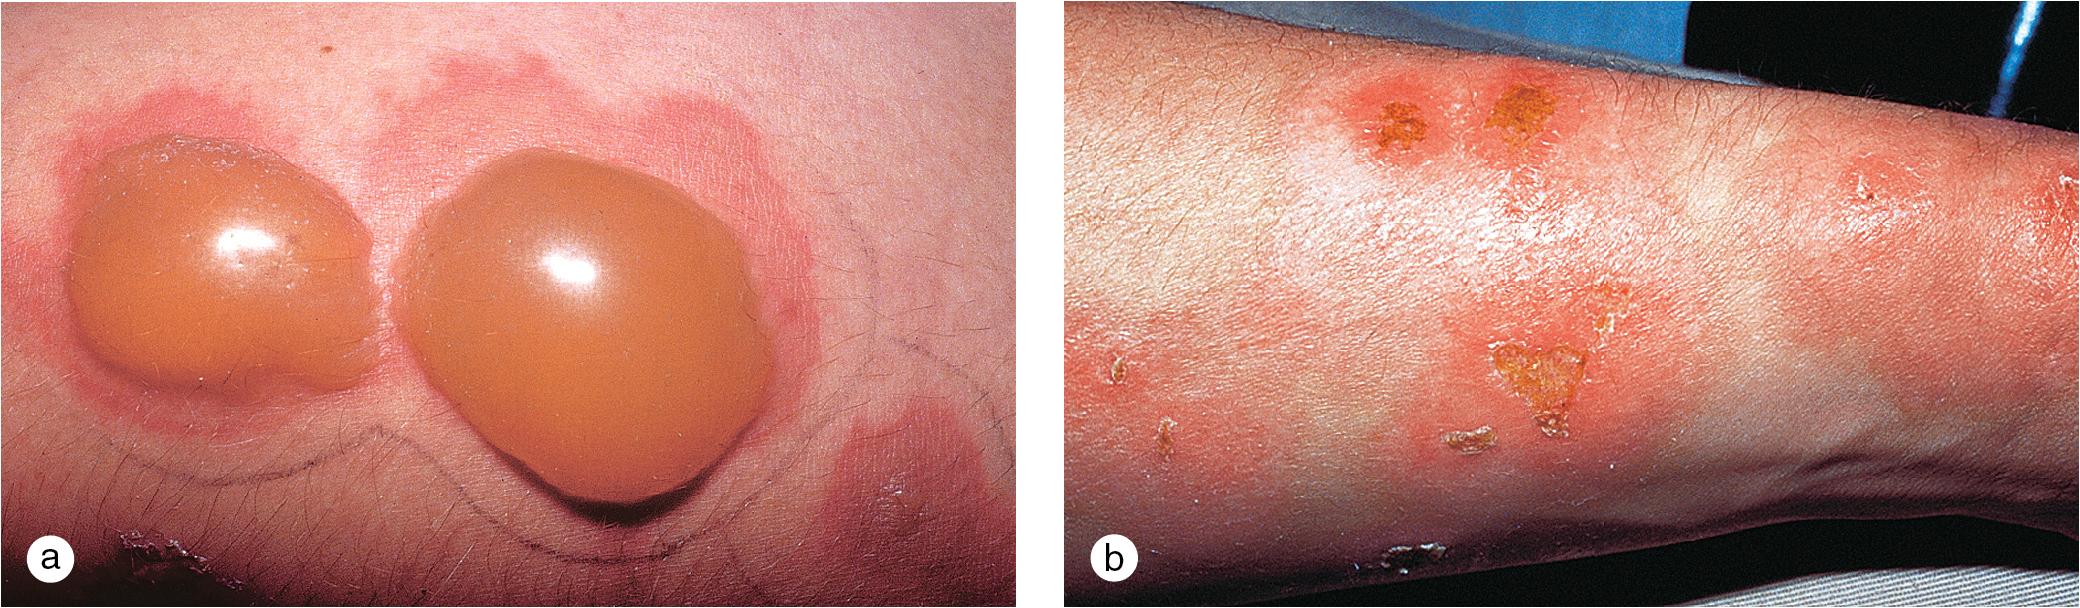 Fig 11.4, Factitial disorders. (a) A 15-year-old boy would periodically return from the woods behind his house with large, tense, bullous lesions on his arms. (b) Under close observation in the hospital, the lesions healed within several days. Later, in therapy, he admitted to applying a caustic liquid to the skin.